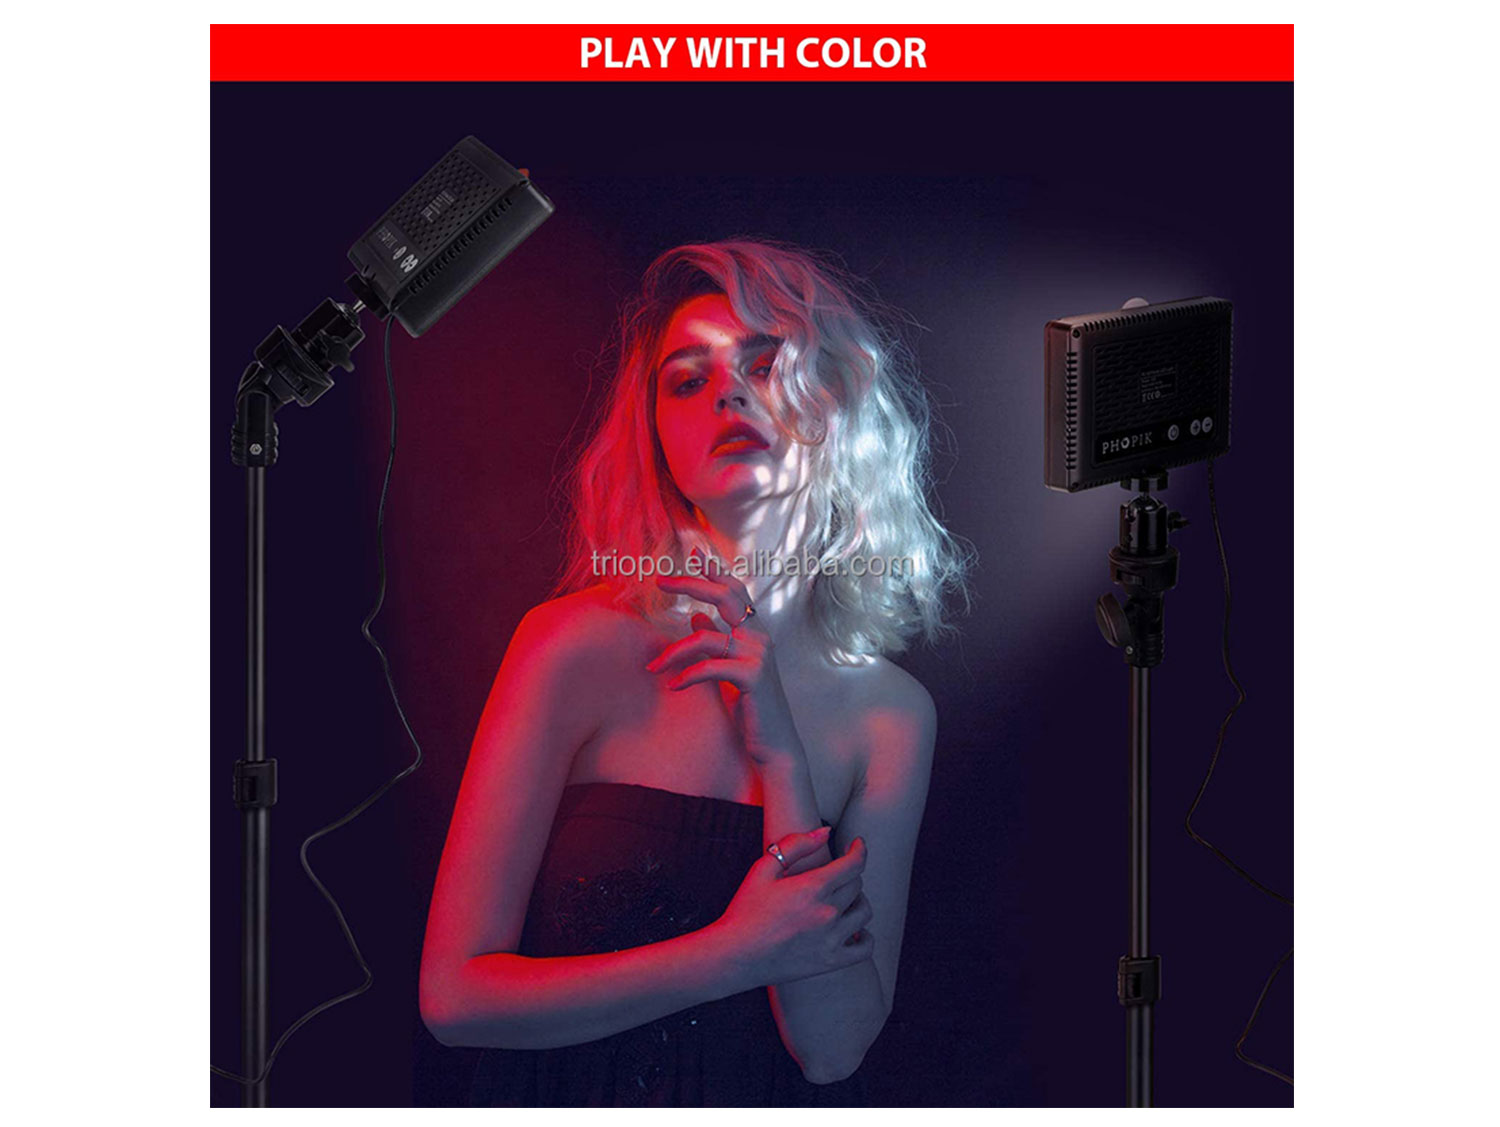 Versatile Tripod Light Stand for Video Shoots and Music Videos